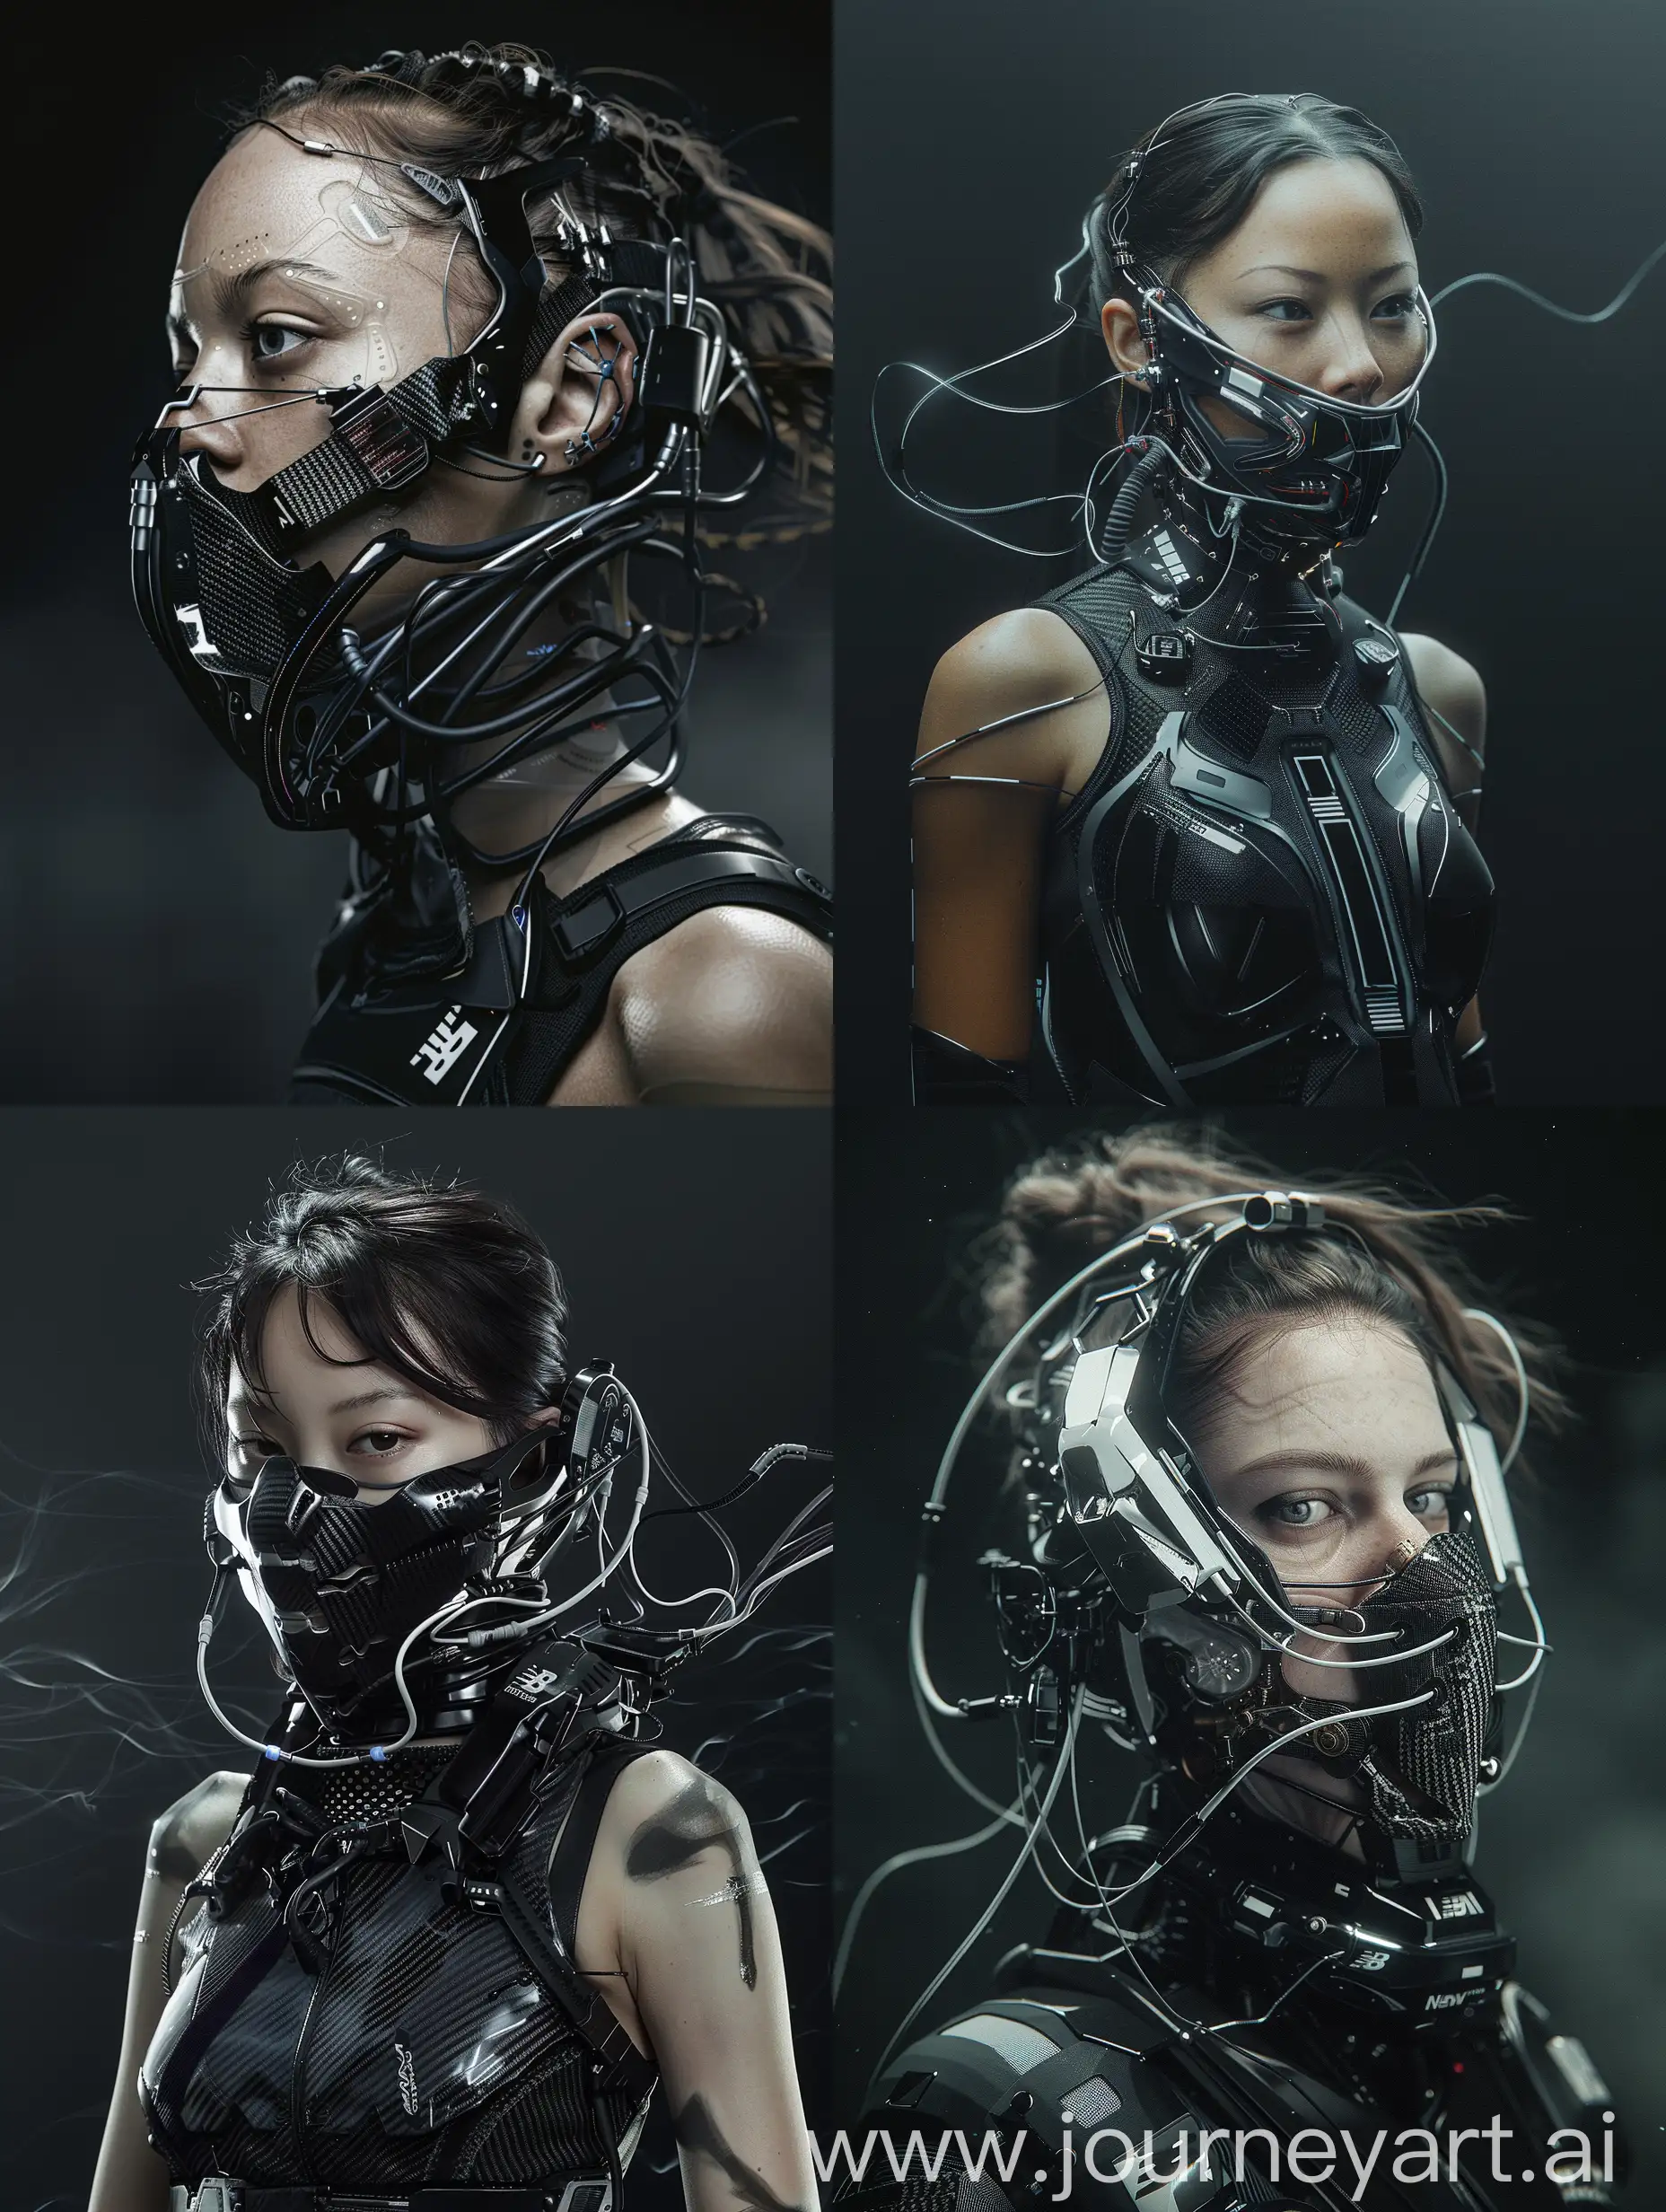 Futuristic-Cyberpunk-Woman-with-Cybernetic-Mask-and-New-Balance-Accents